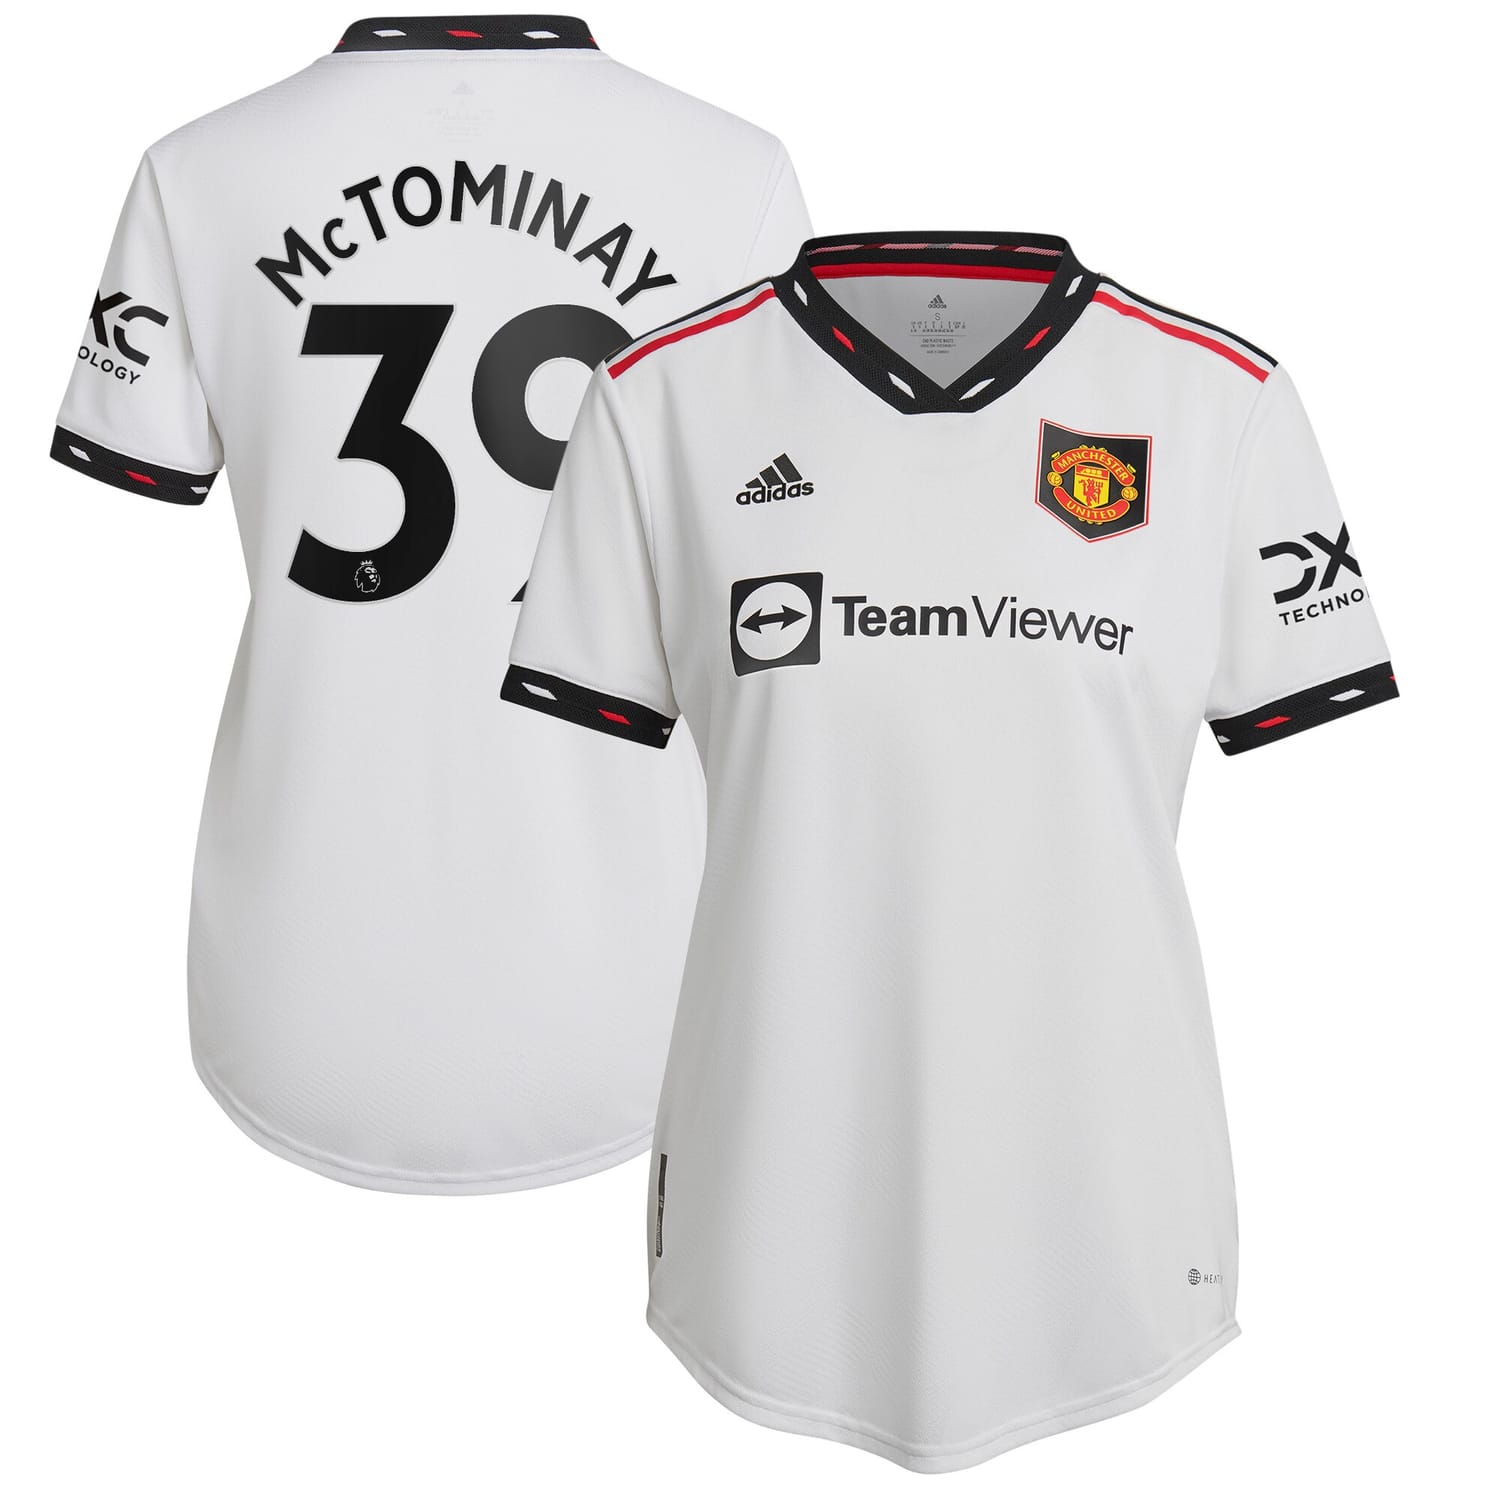 Premier League Manchester United Away Authentic Jersey Shirt 2022-23 player Scott McTominay 39 printing for Women